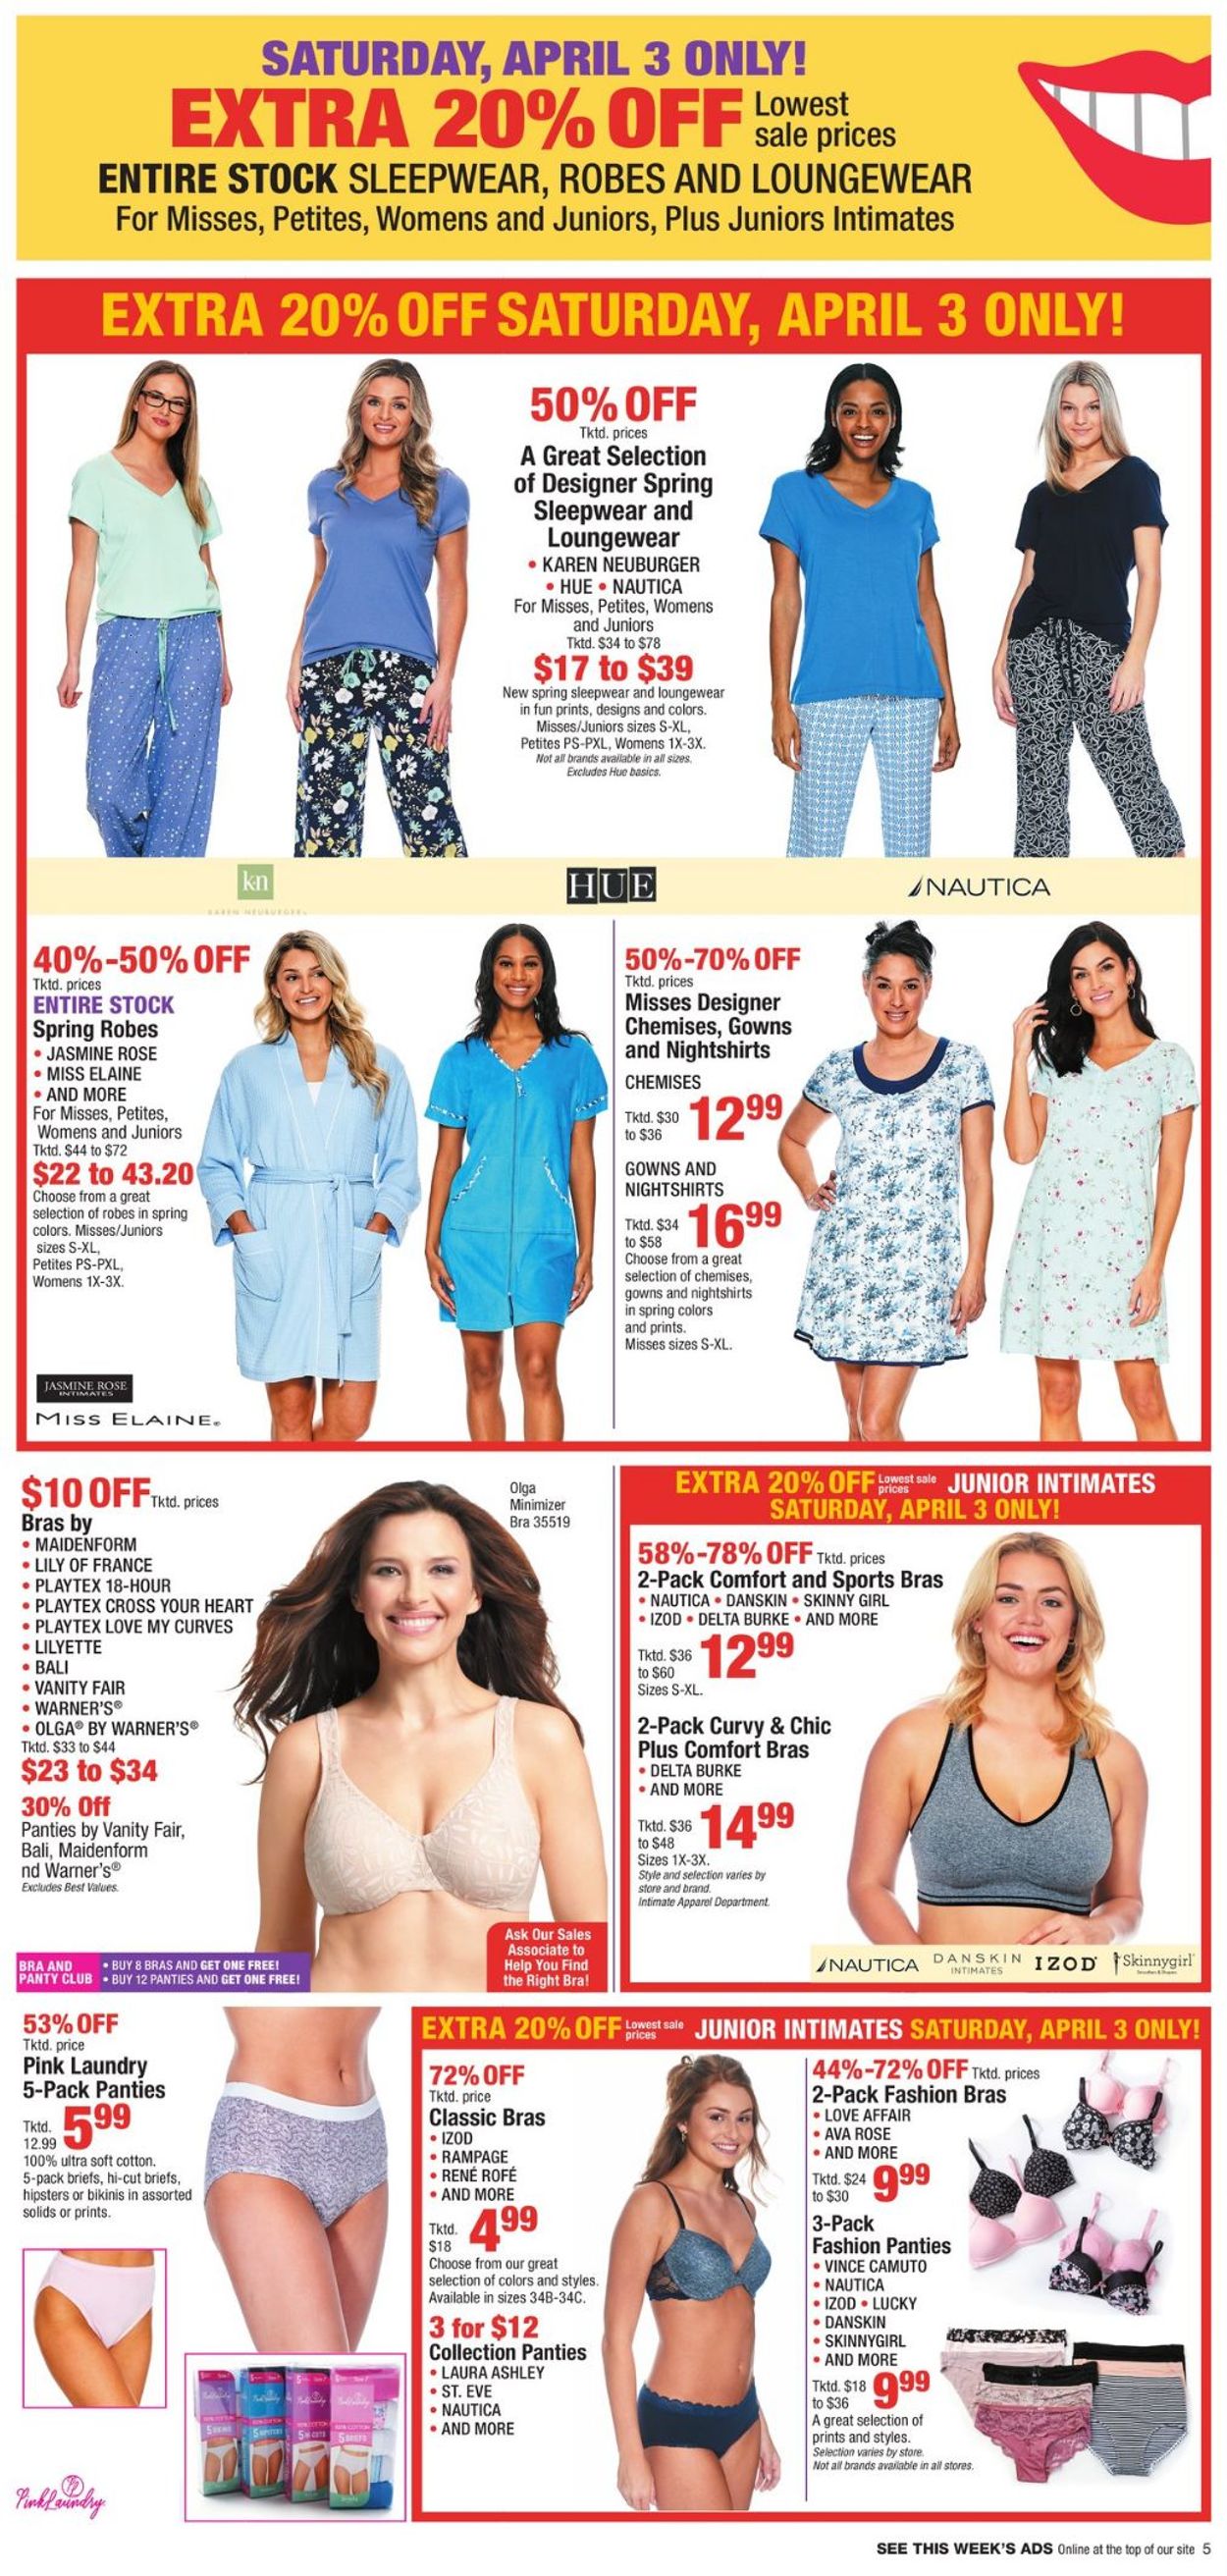 Catalogue Boscov's Easter 2021 ad from 03/31/2021